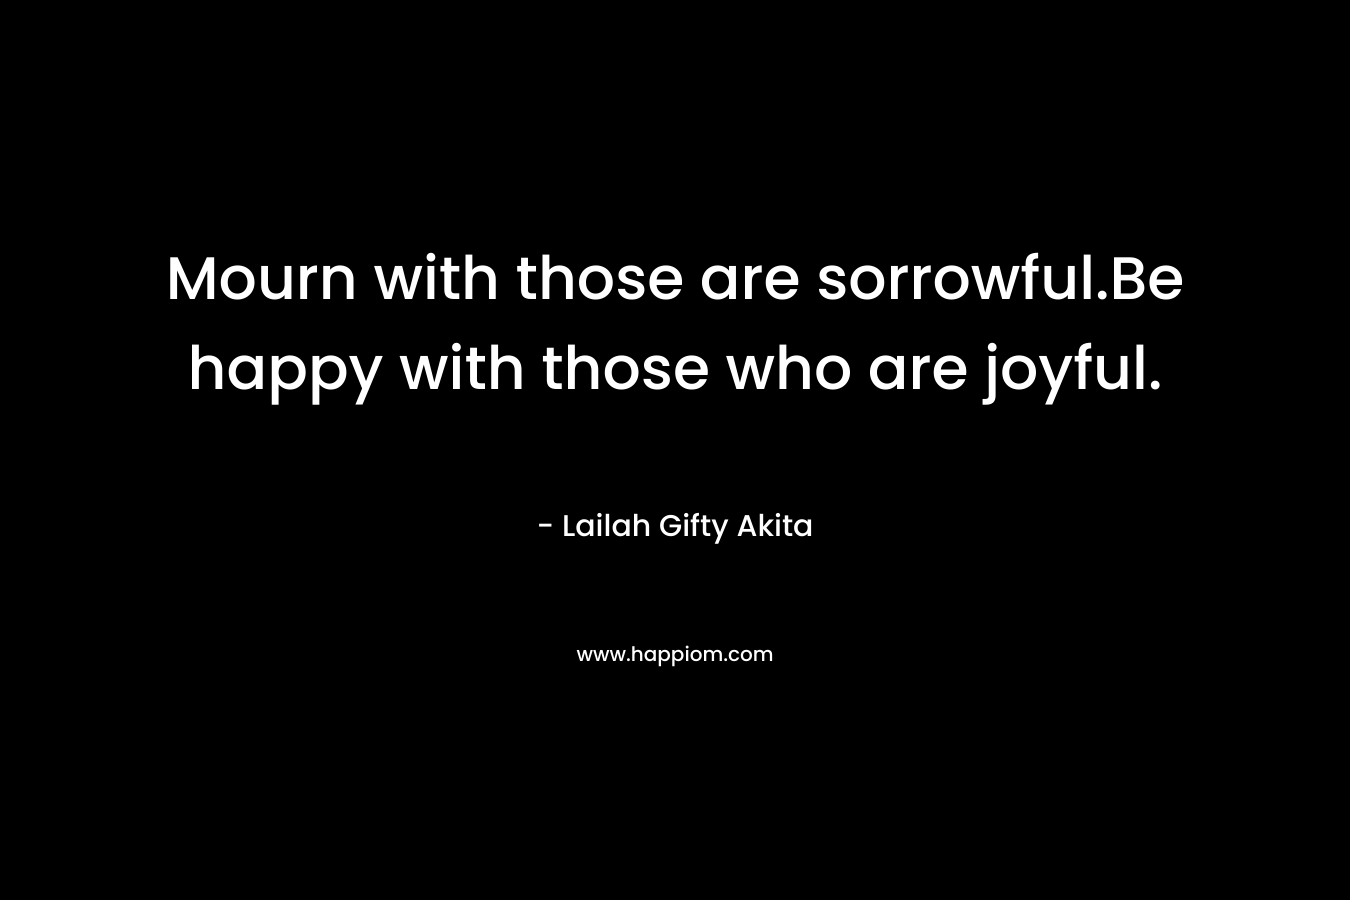 Mourn with those are sorrowful.Be happy with those who are joyful. – Lailah Gifty Akita